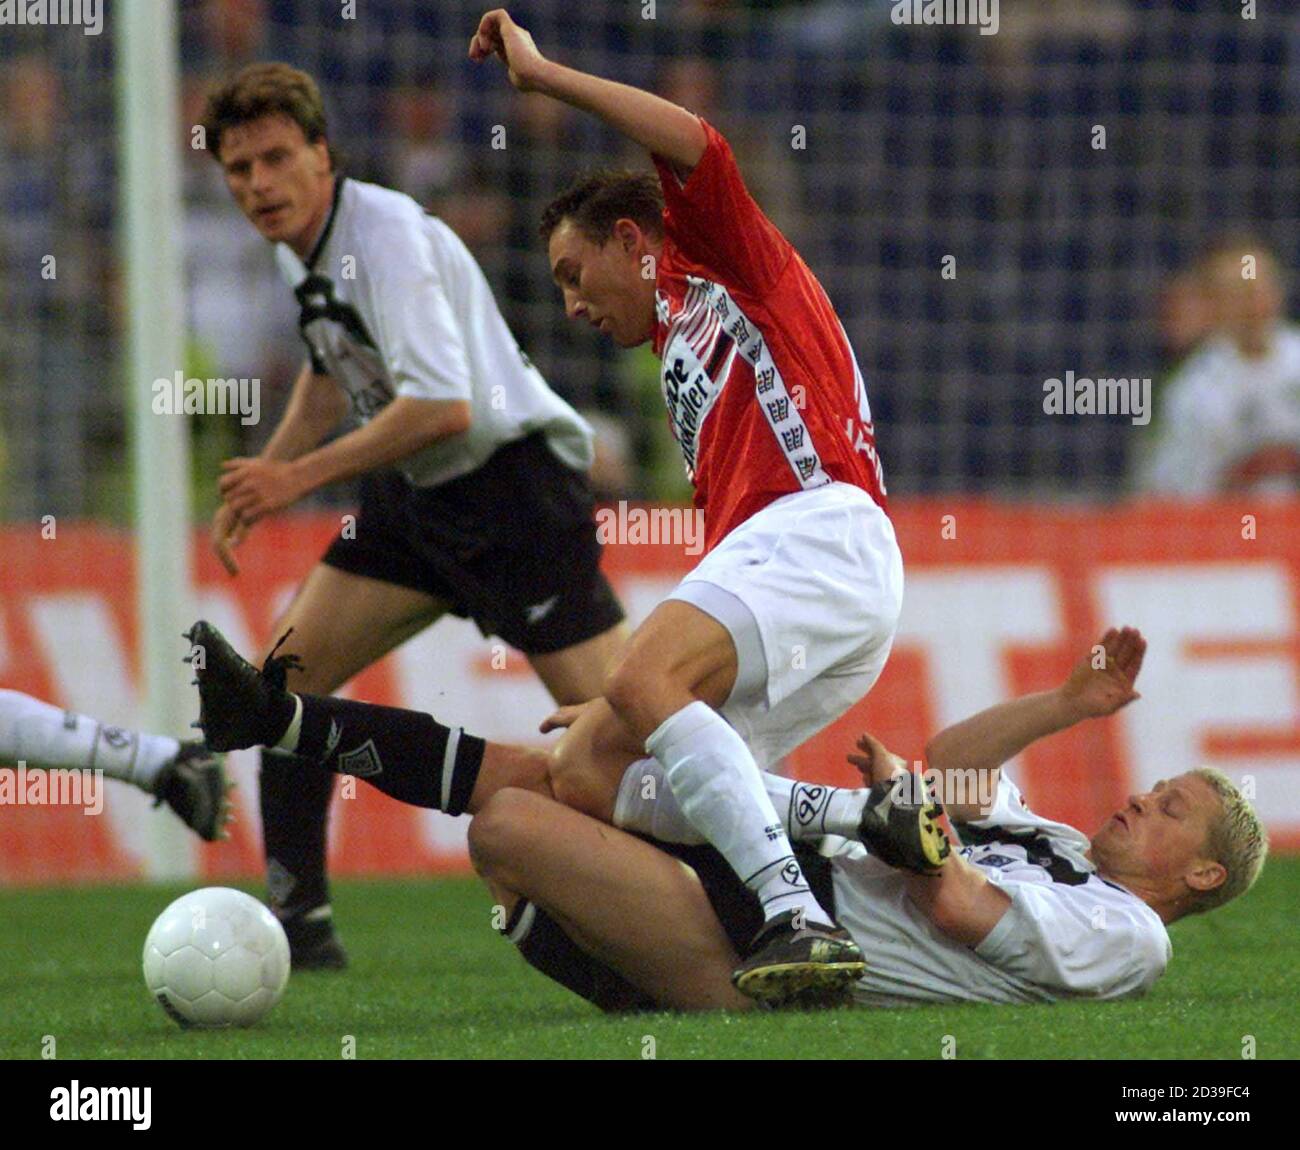 Steffen Korell (bottom) of Borussia Moenchengladbach is tackled by Oliver Schaefer (top) of Hanover 96 during their second division match in Hanover May 7, 2001. The match ended in a 0-0 draw.  FAB/ Stock Photo